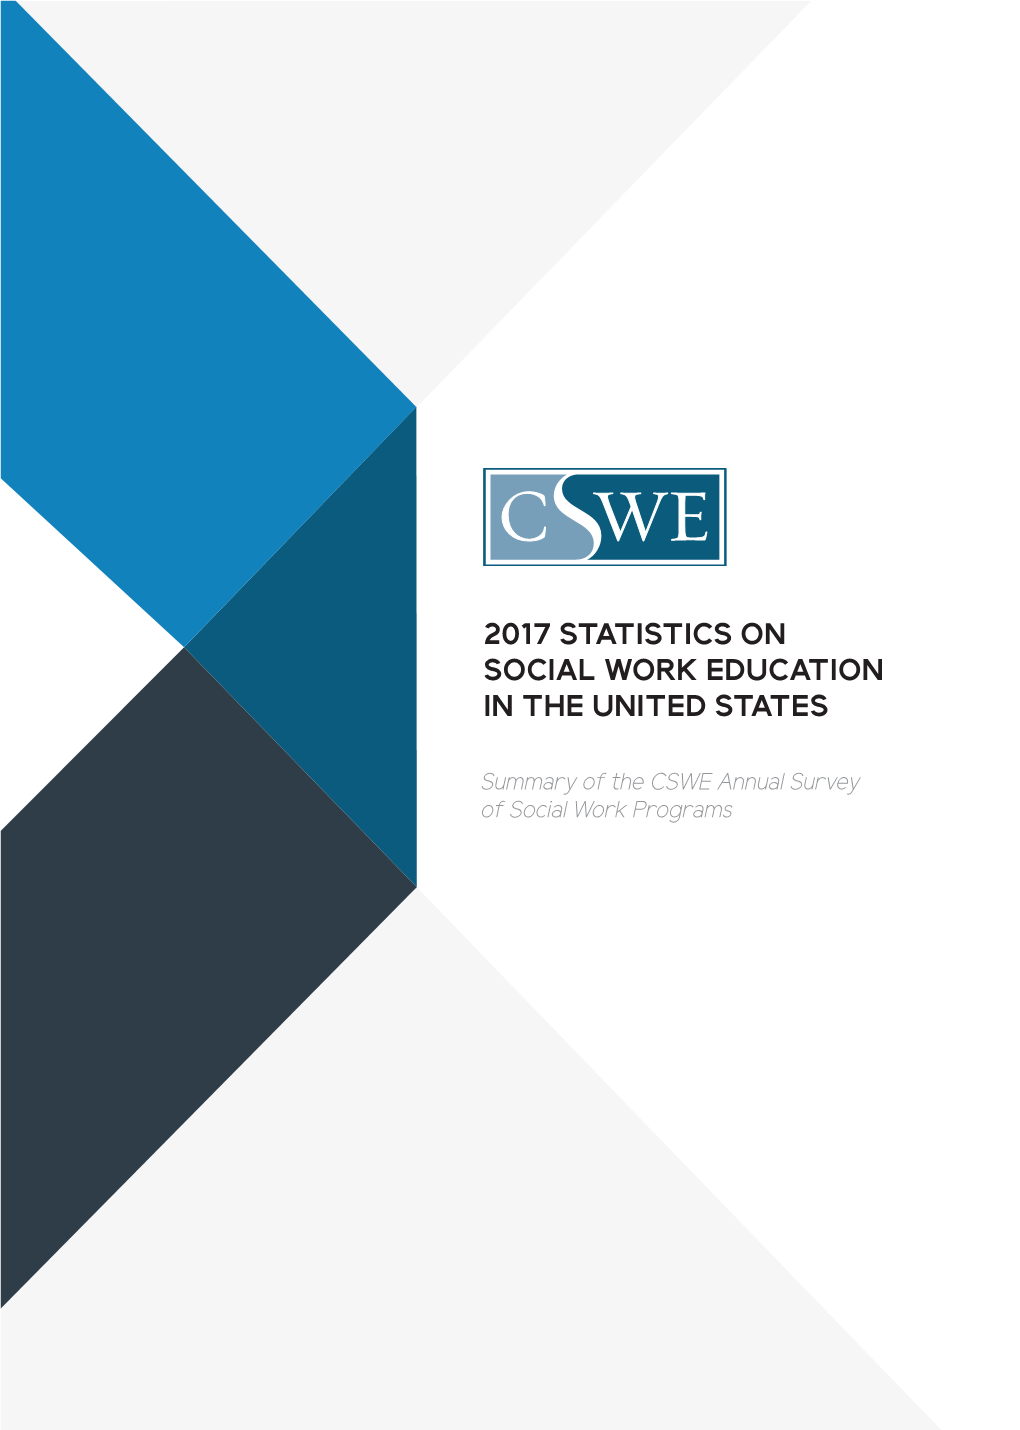 2017 Annual Statistics on Social Work Education in the United States